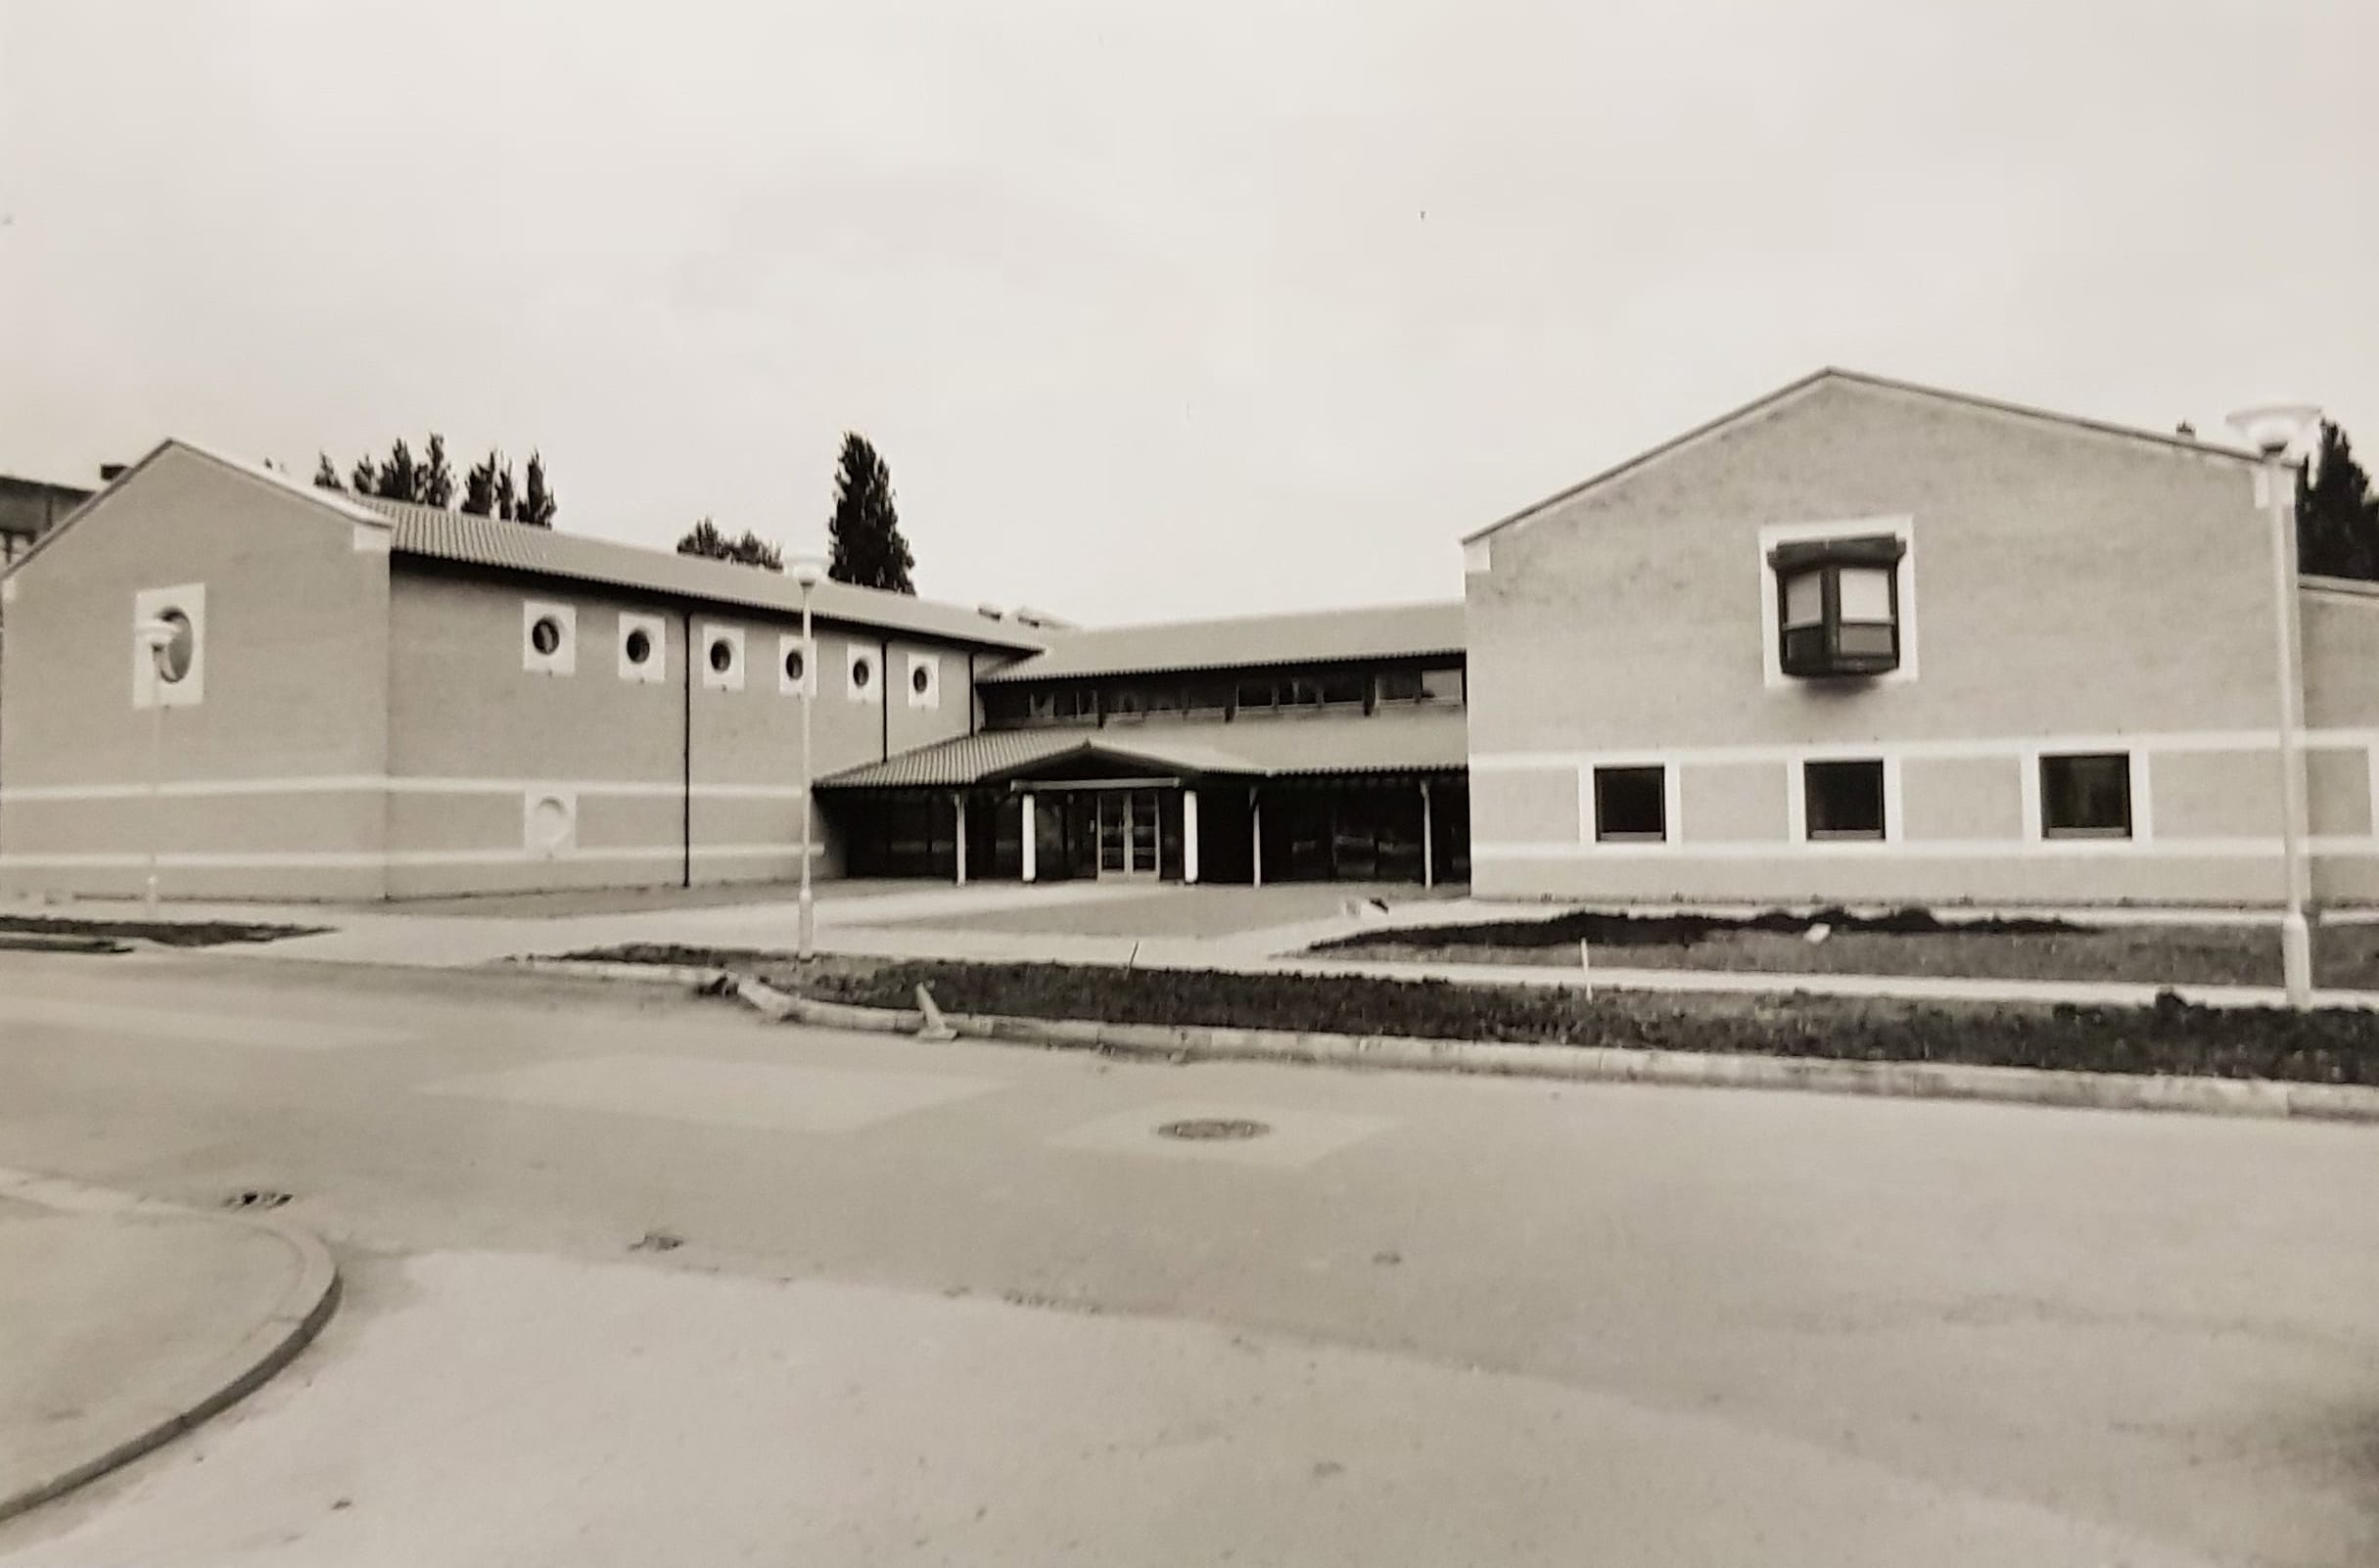 A black and white photo of the exterior of the recital hall